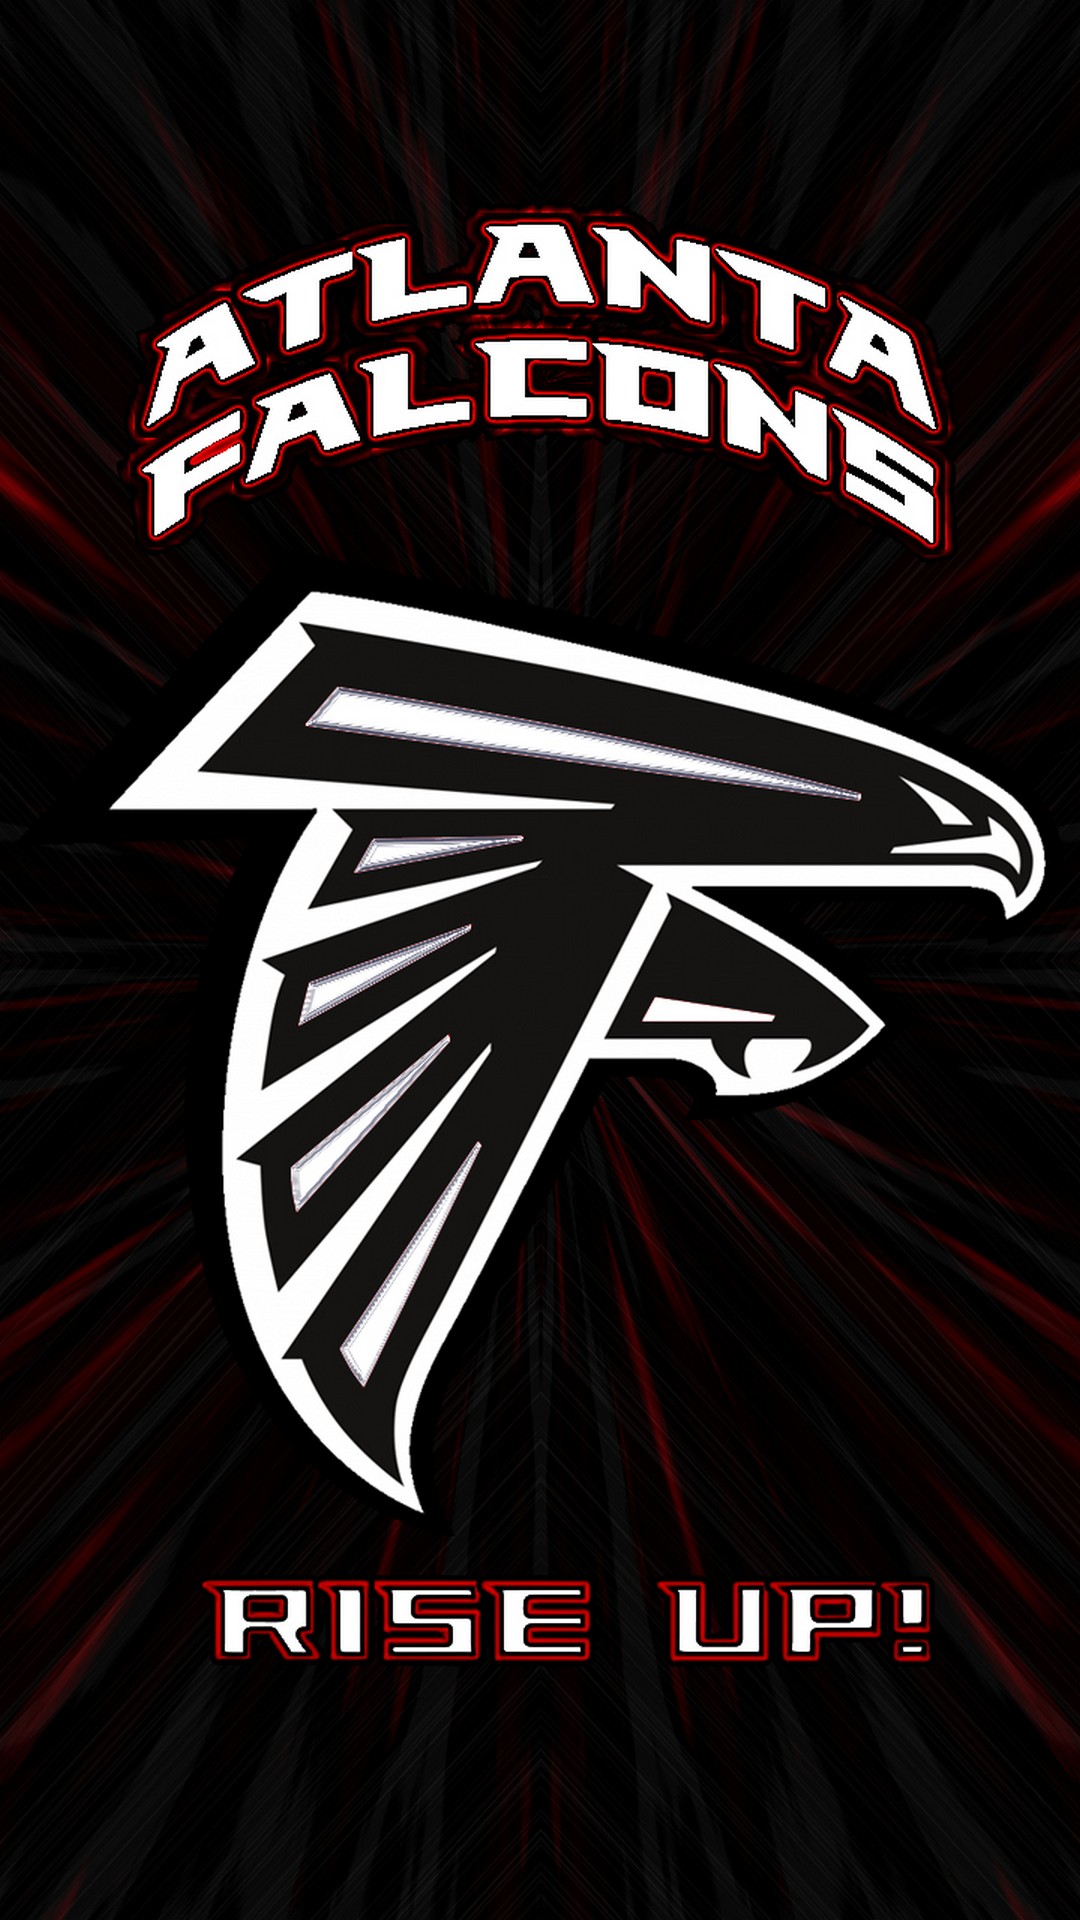 Atlanta Falcons iPhone 8 Wallpaper with high-resolution 1080x1920 pixel. Download and set as wallpaper for Apple iPhone X, XS Max, XR, 8, 7, 6, SE, iPad, Android